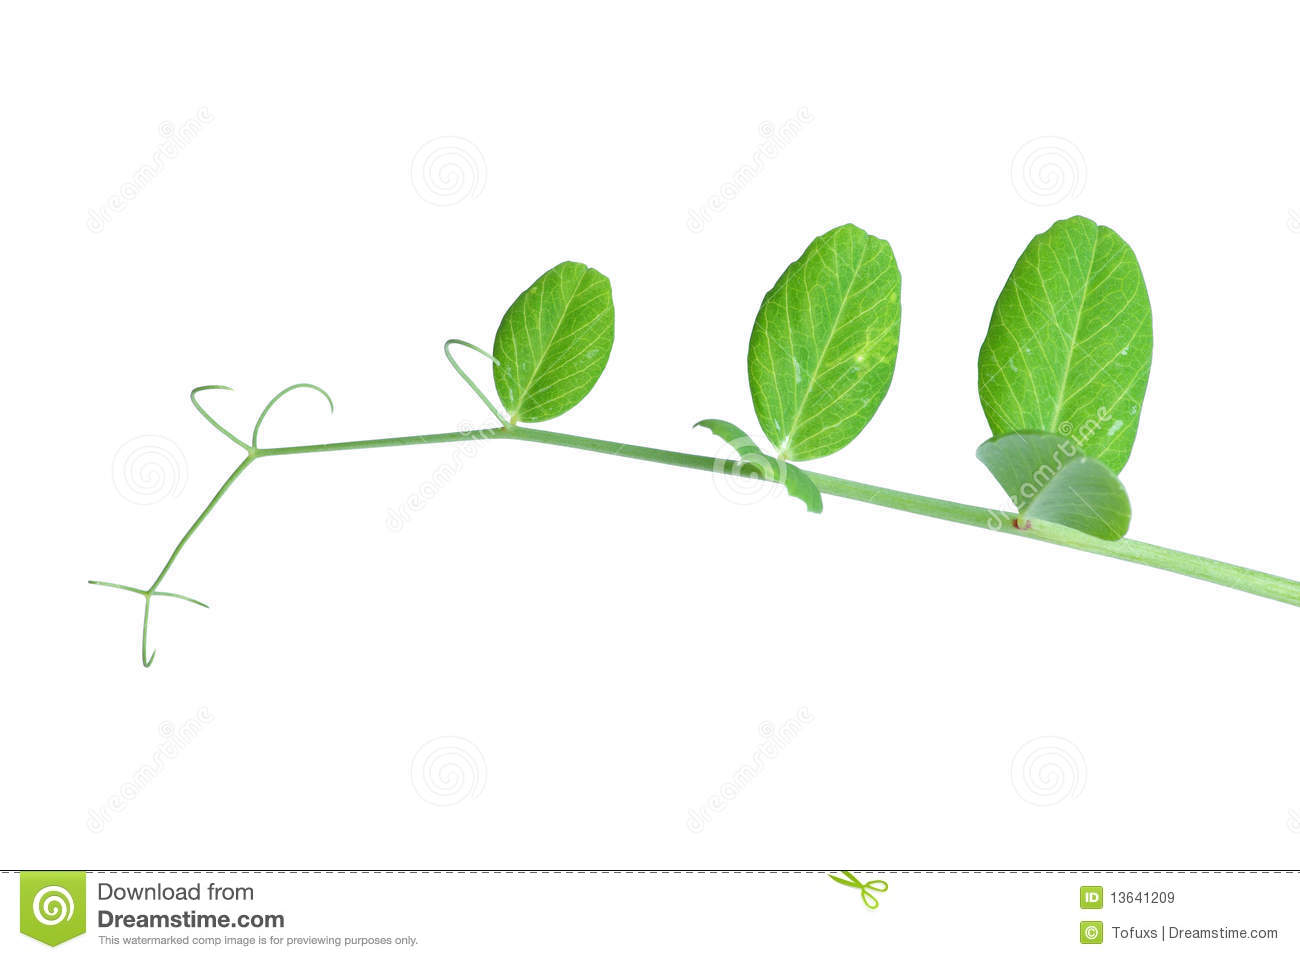 Pea Vine Royalty Free Stock Images   Image  13641209